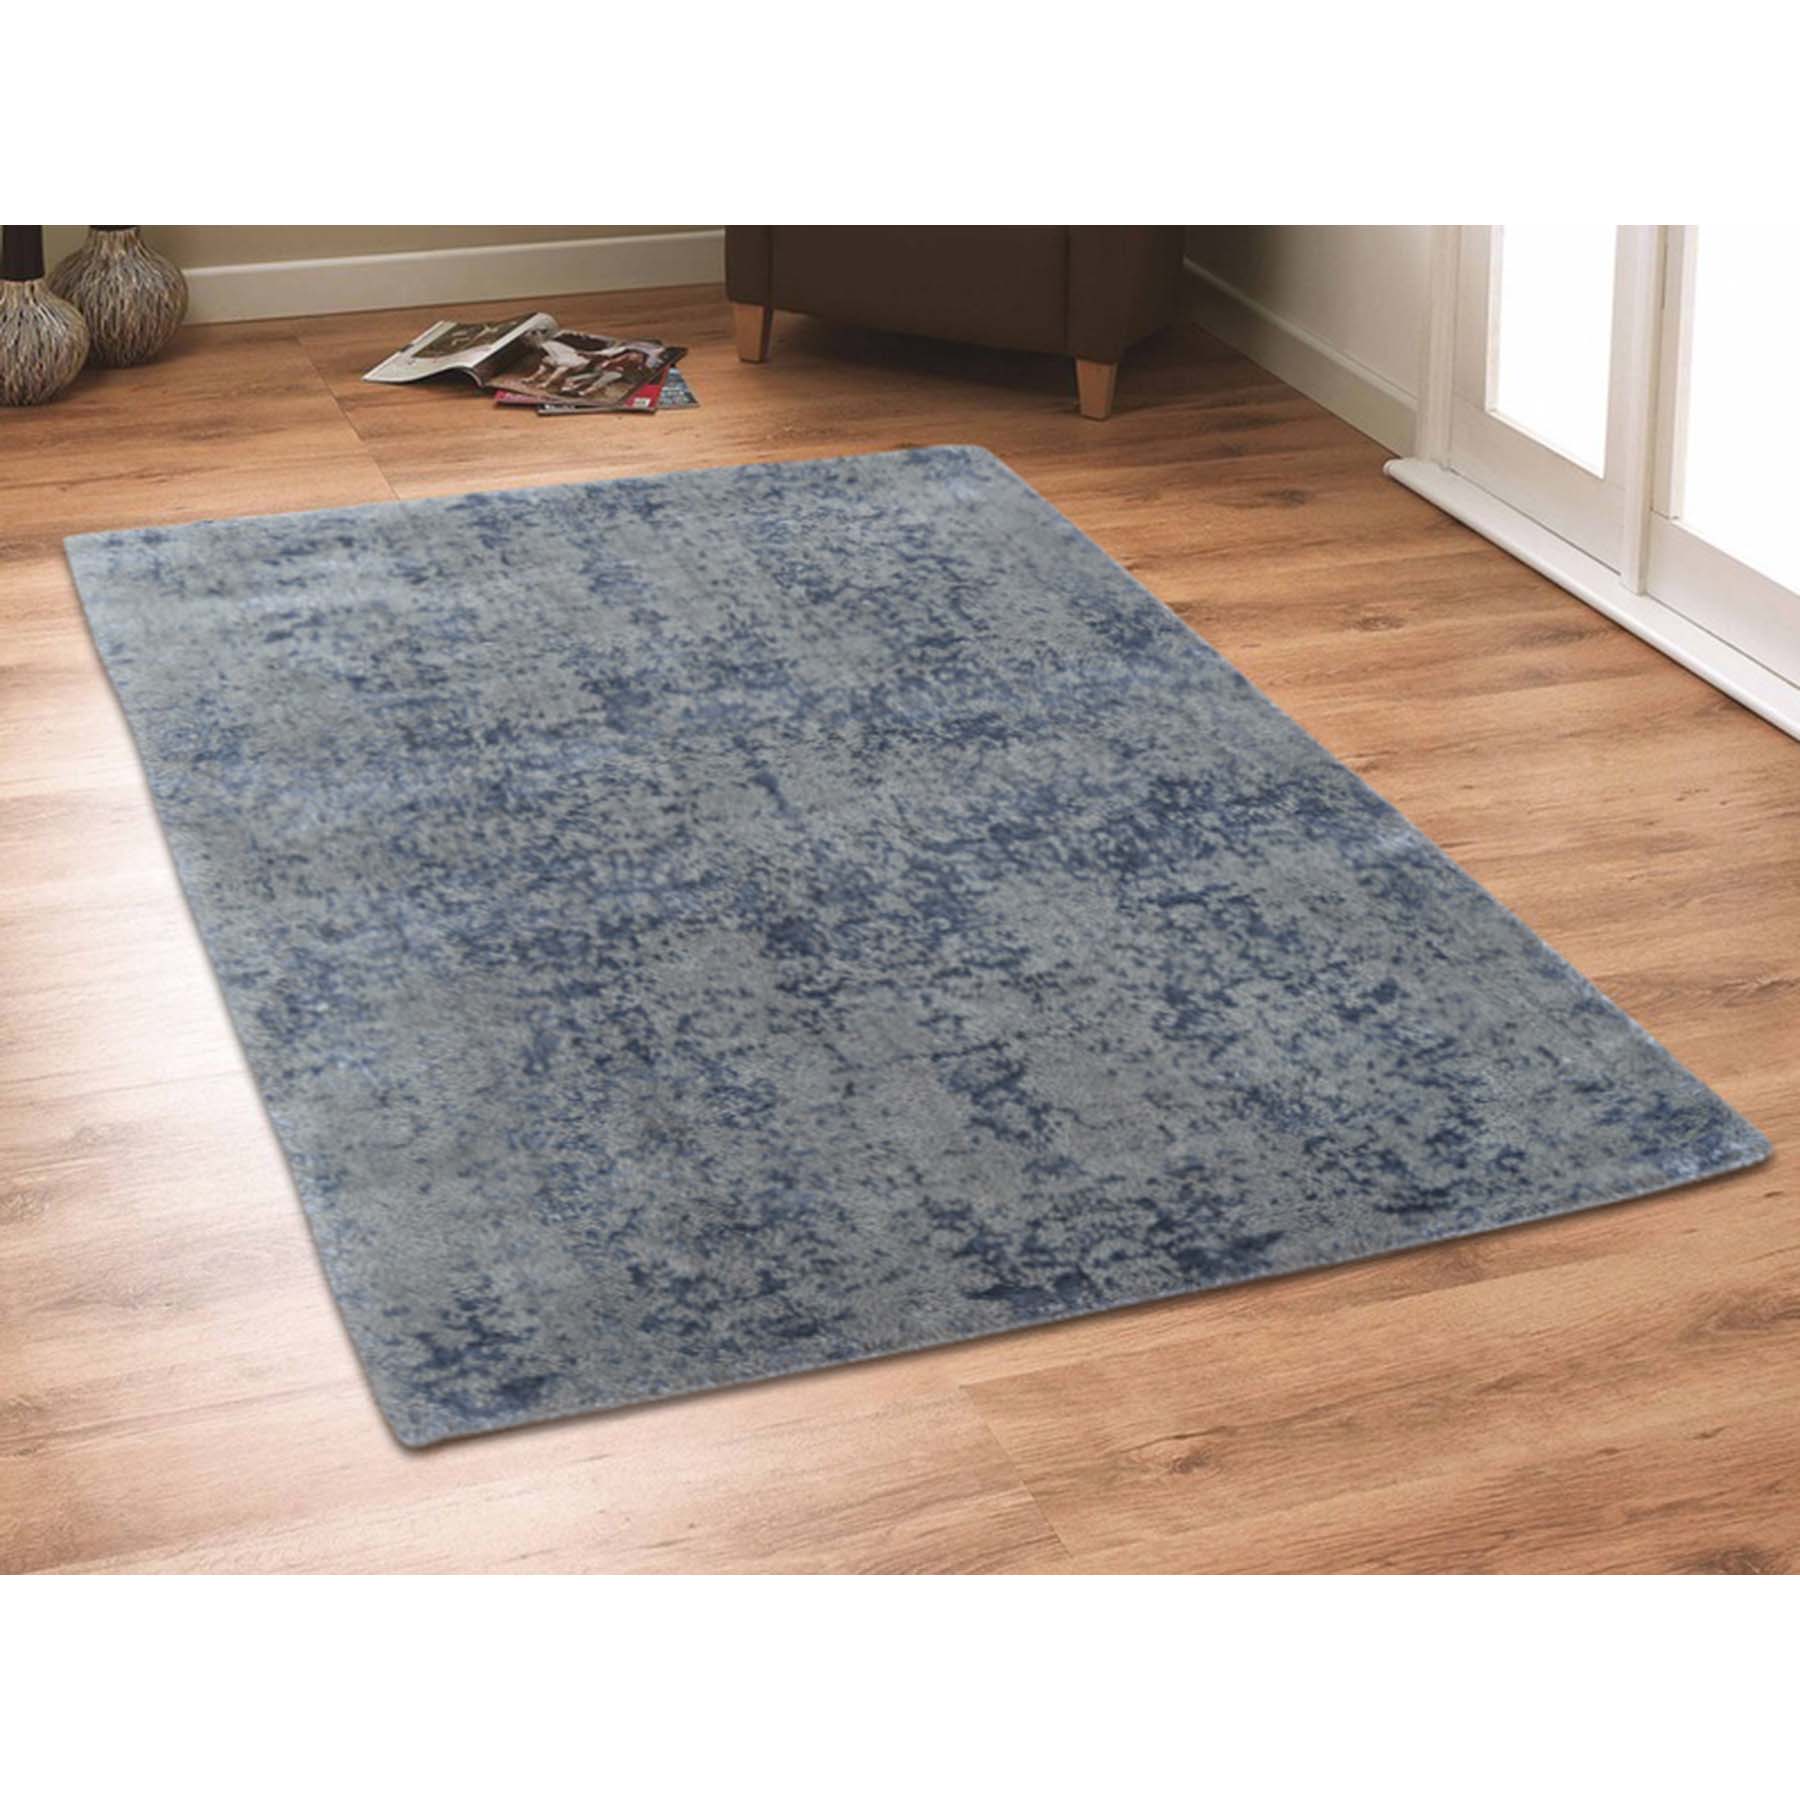 2-x3- Abstract Design Tone on Tone Wool and Silk Hand-Loomed Oriental Rug 